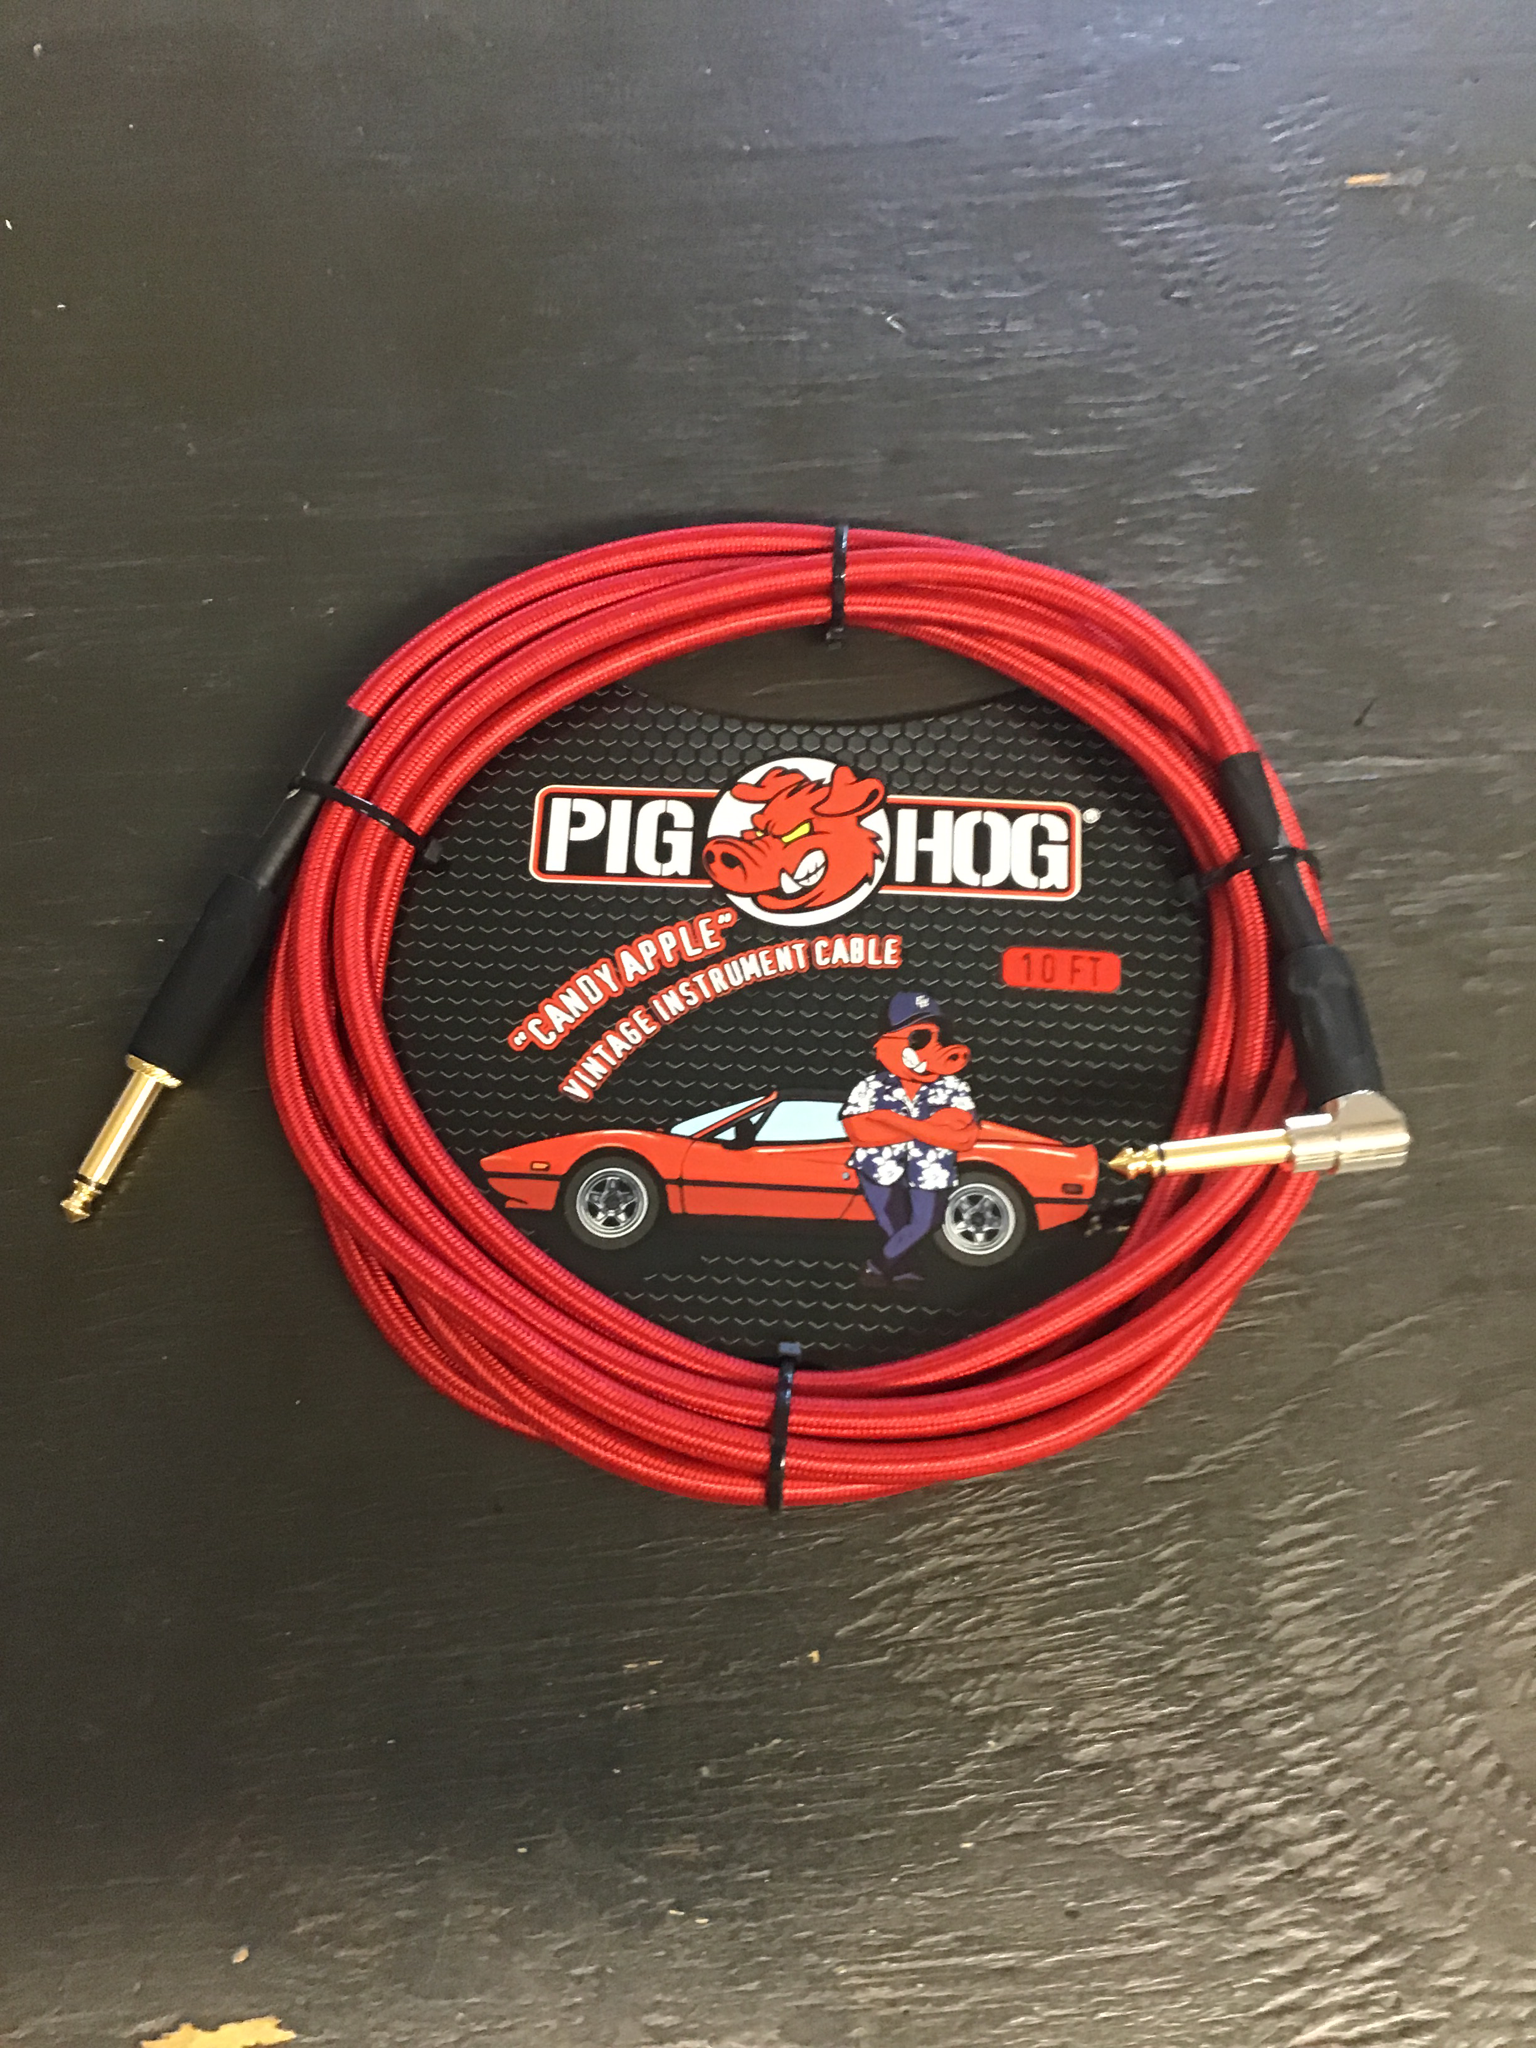 Pig Hog  10 foot cable candy apple